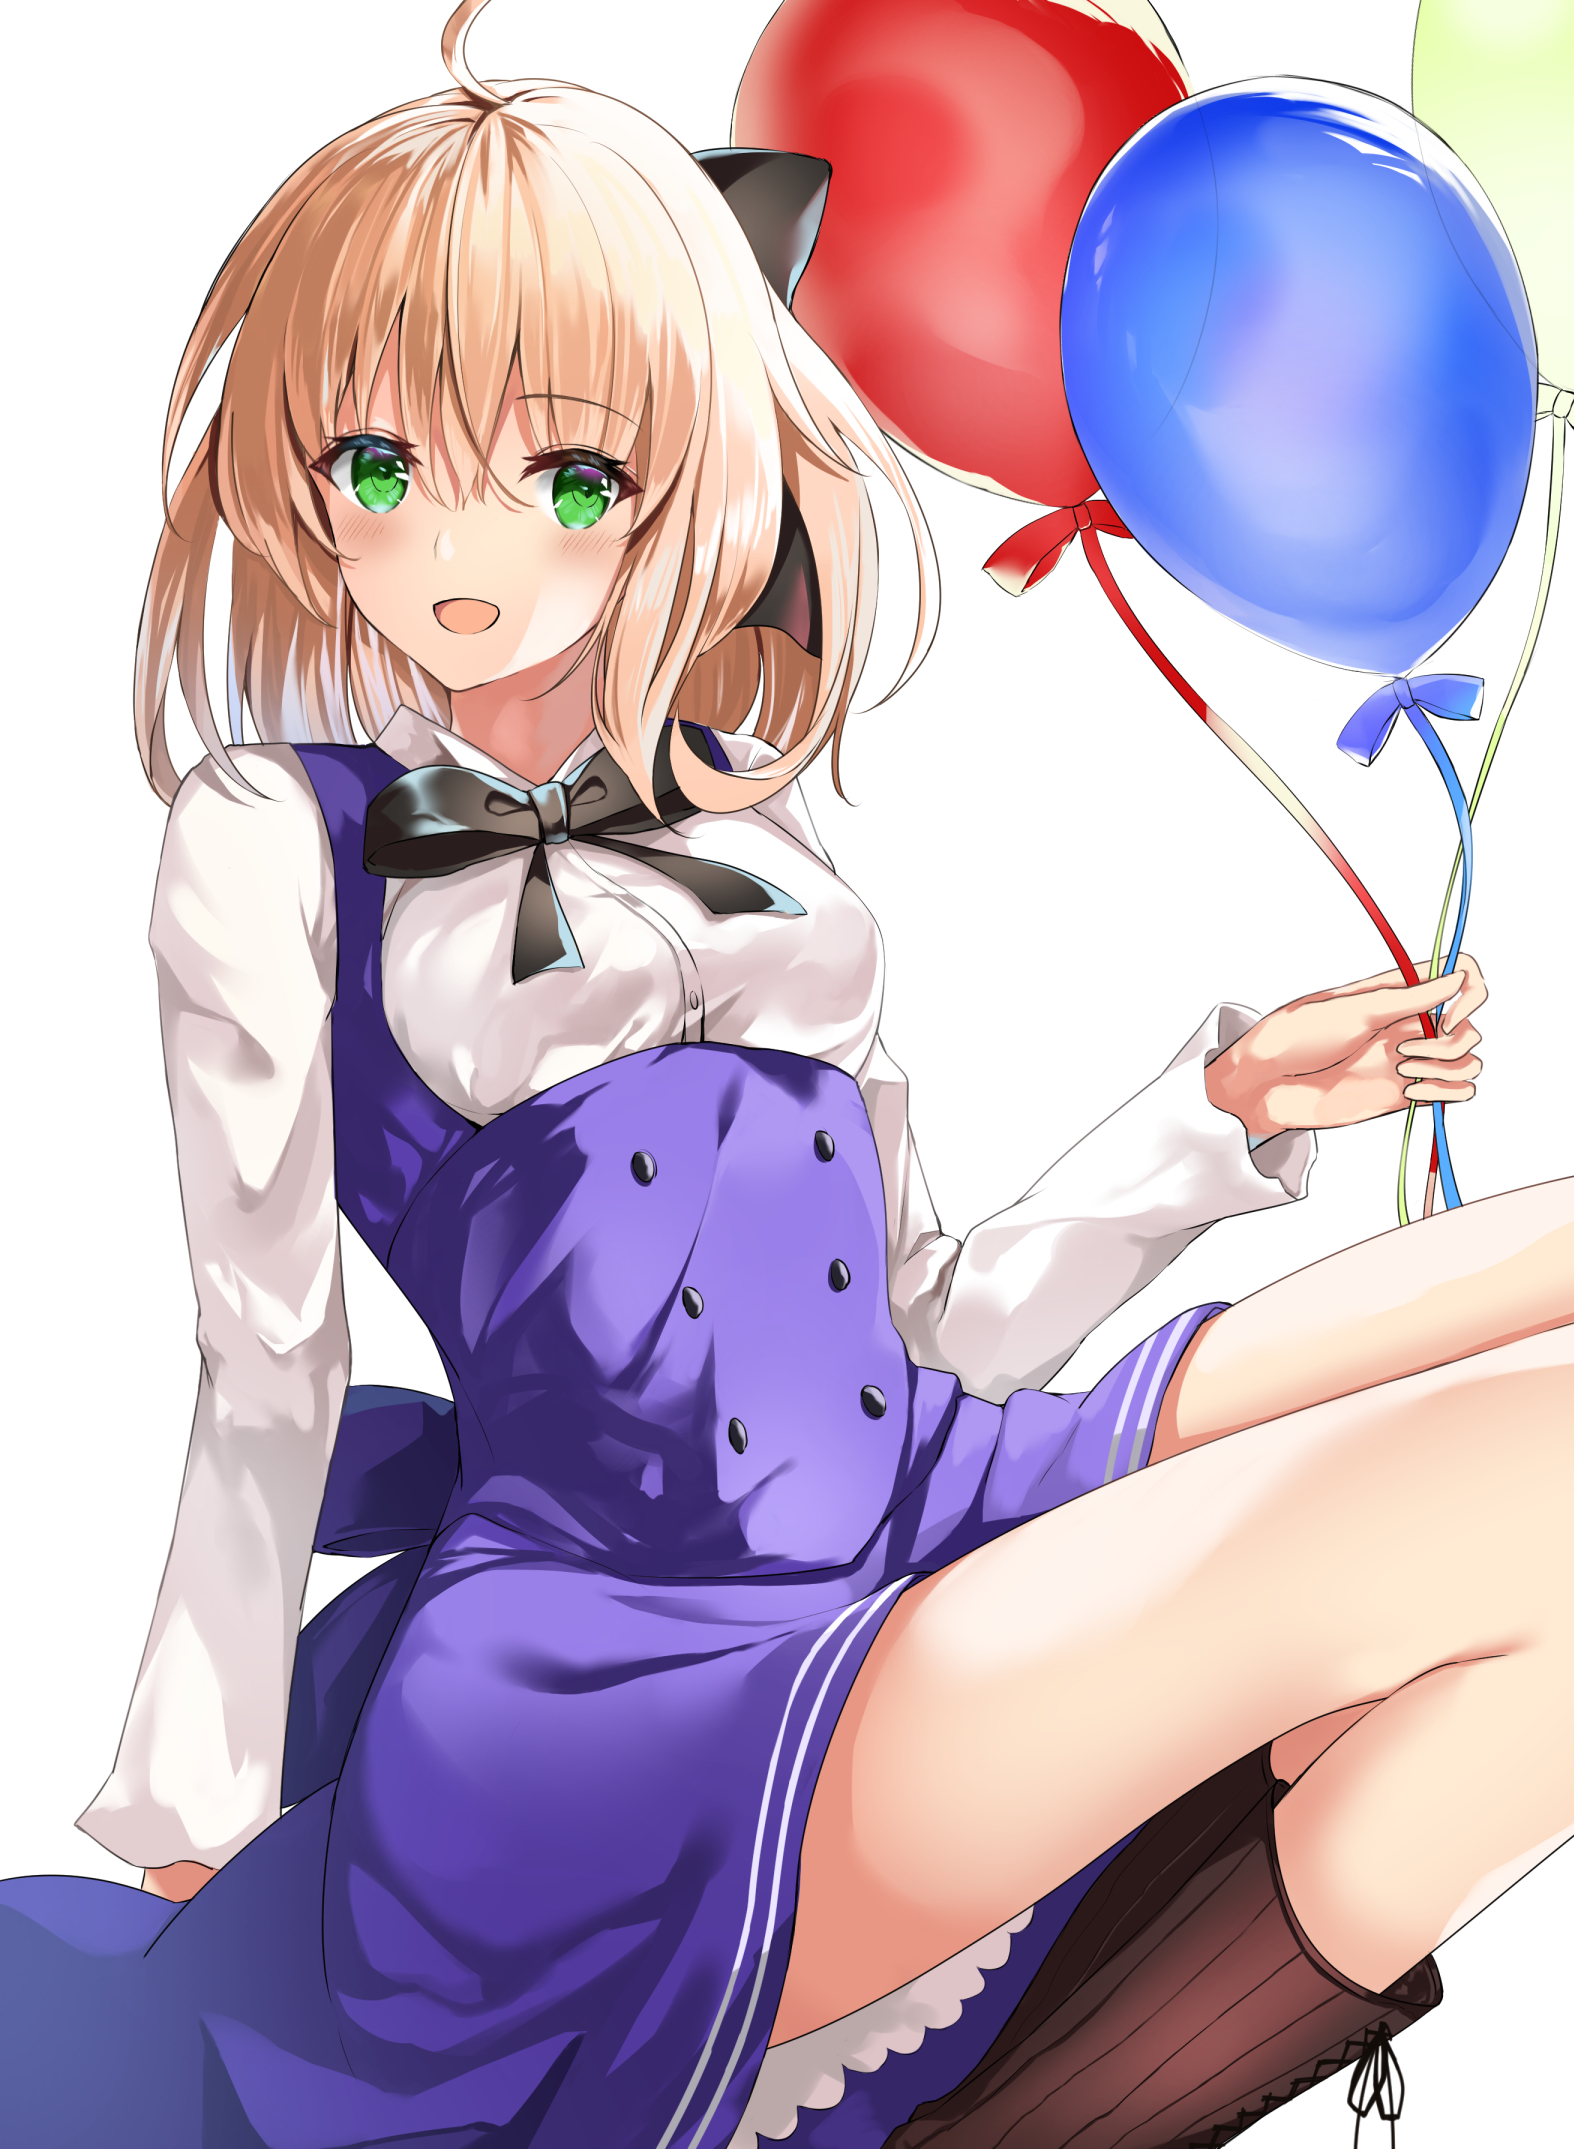 Anime 1574x2149 anime girls digital art artwork 2D portrait display anime Fate series Saber Lily Fate/Unlimited Codes  Fate/Grand Order